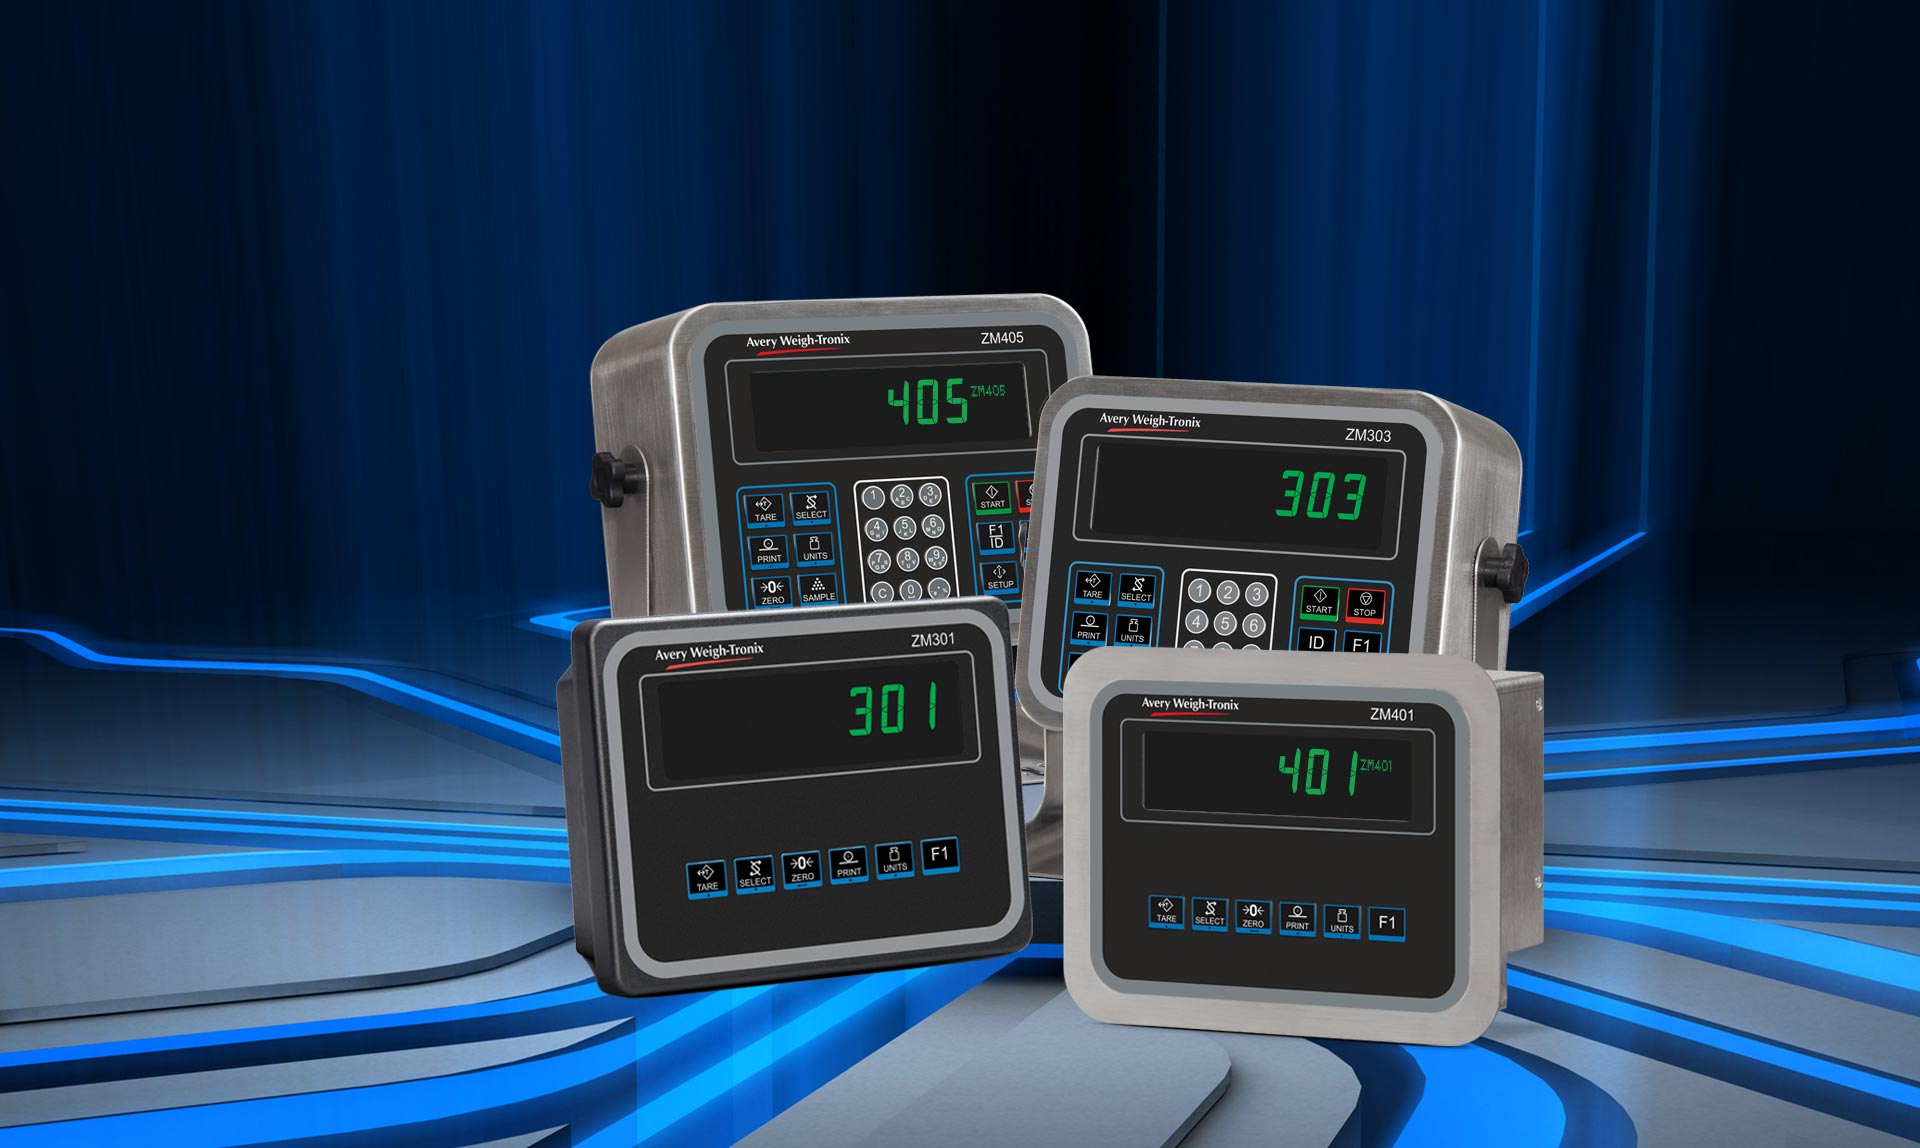 New IP69k Indicator Range Features High Visibility Display